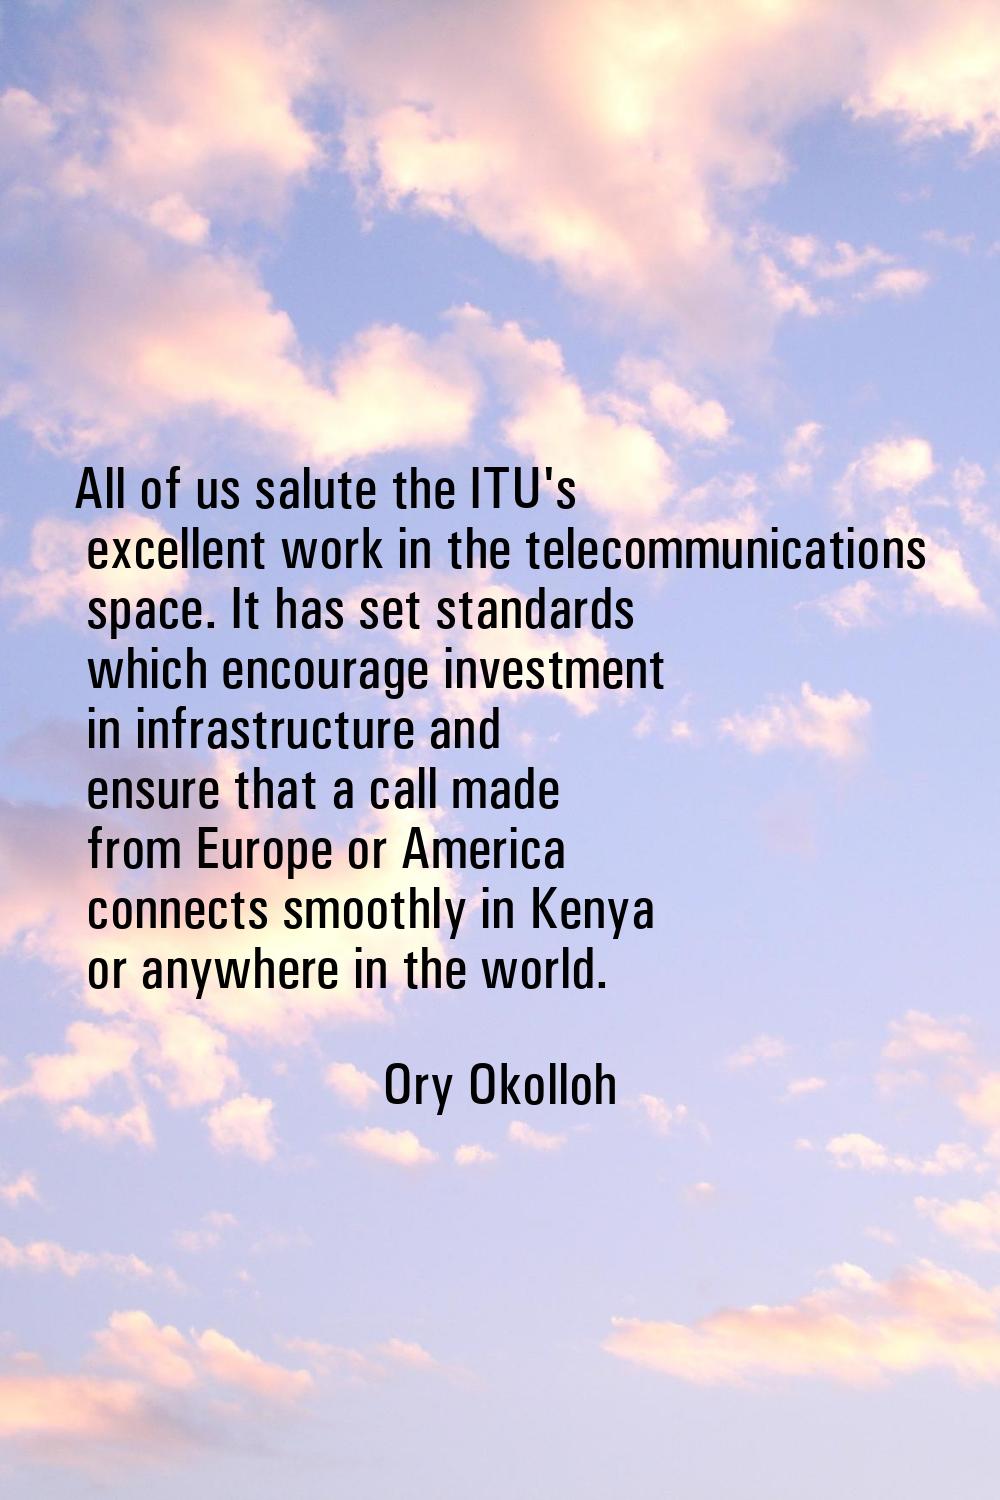 All of us salute the ITU's excellent work in the telecommunications space. It has set standards whi